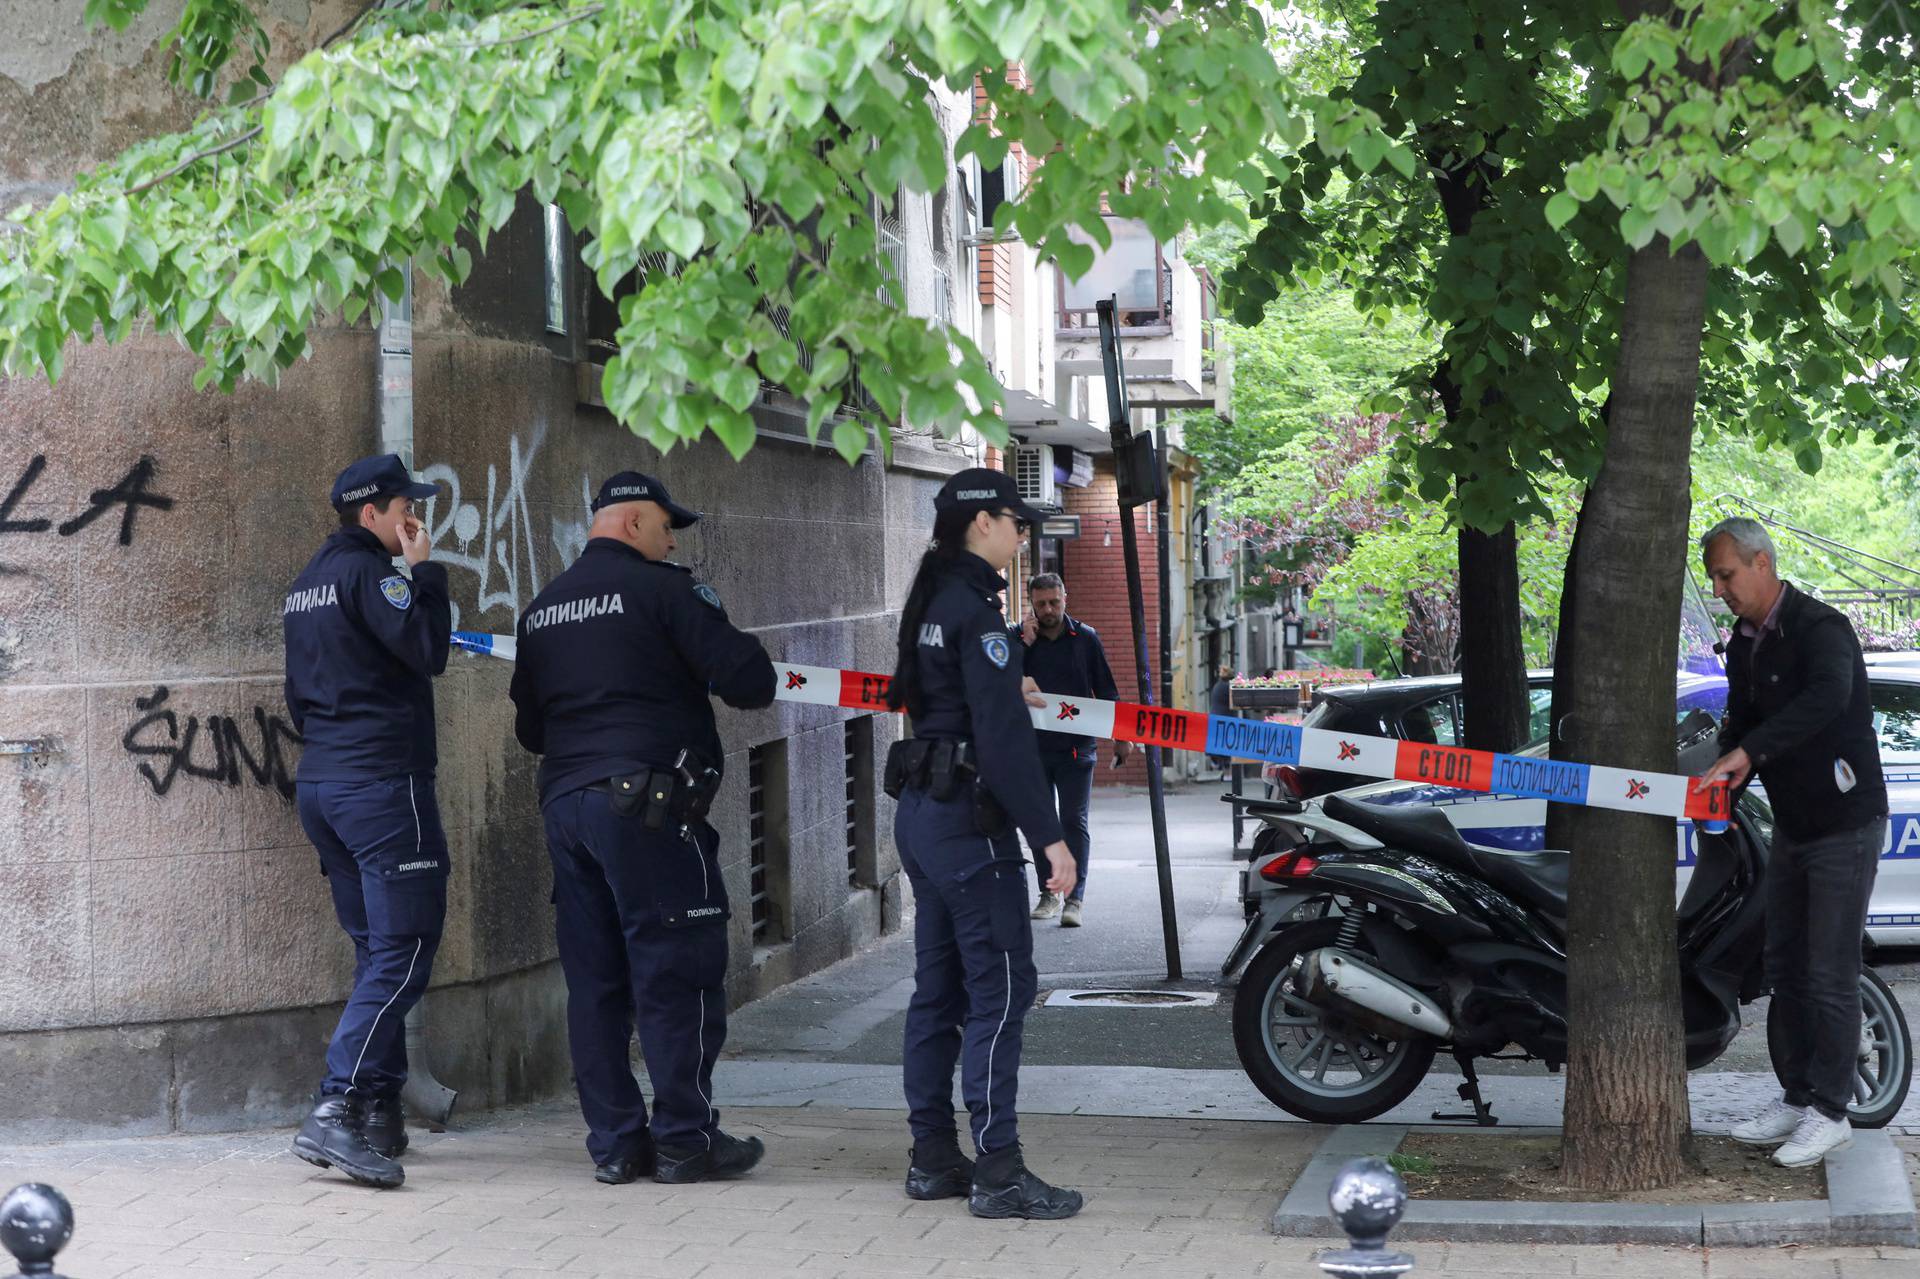 Police officers secure the area after a 14-year-old boy opened fire on other students and security guards at a school in downtown Belgrade